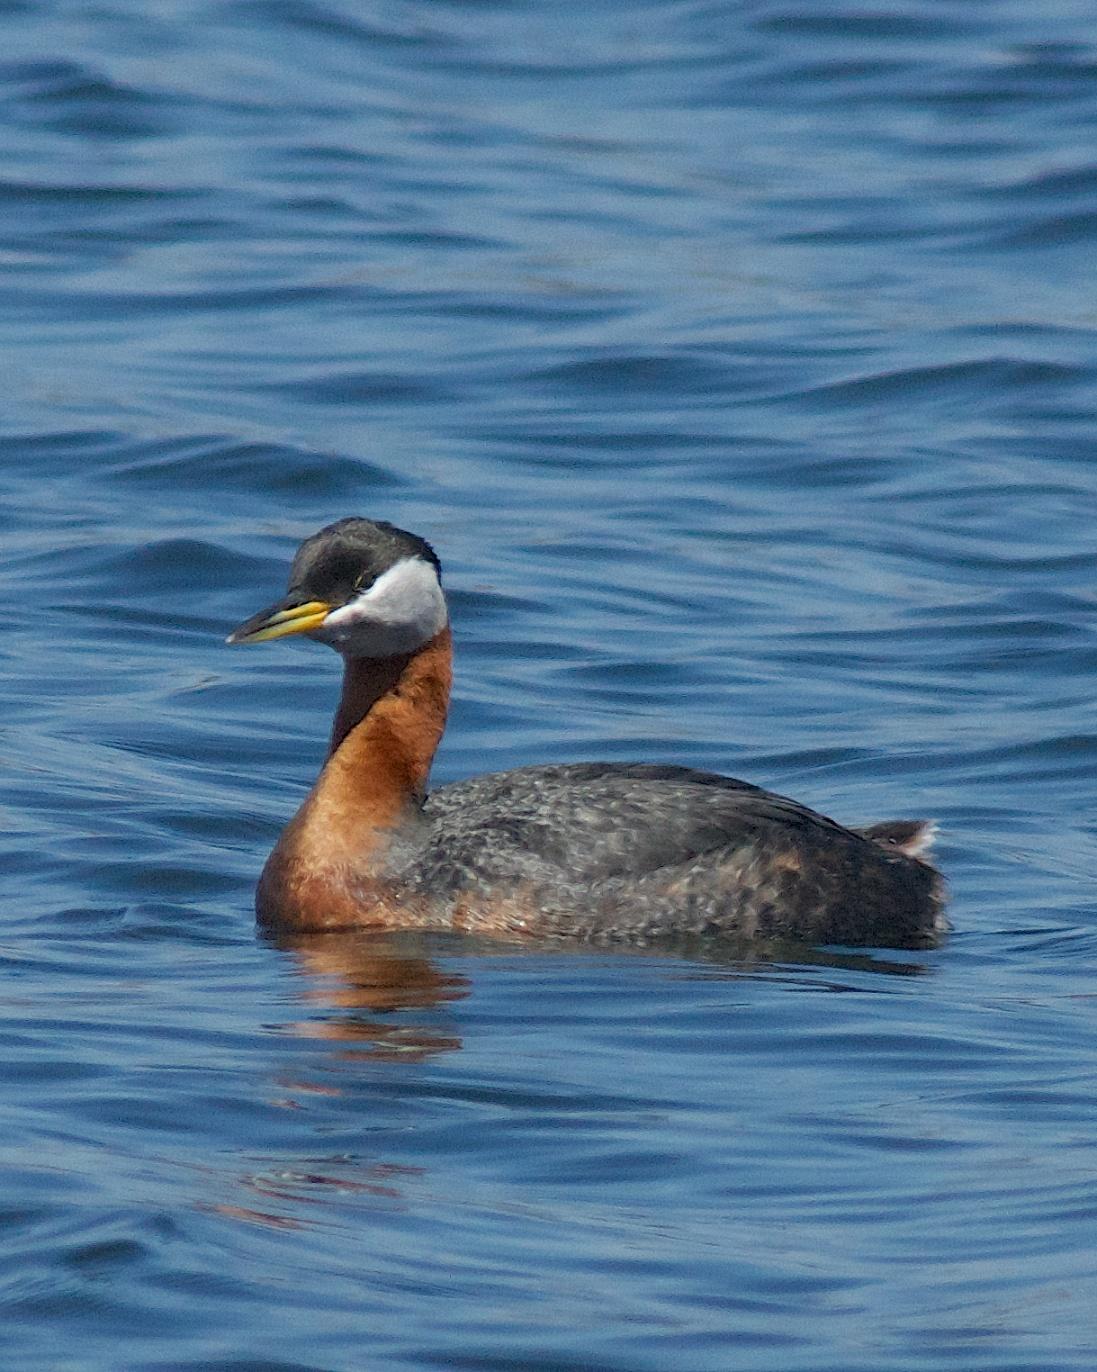 Red-necked Grebe Photo by Gerald Hoekstra